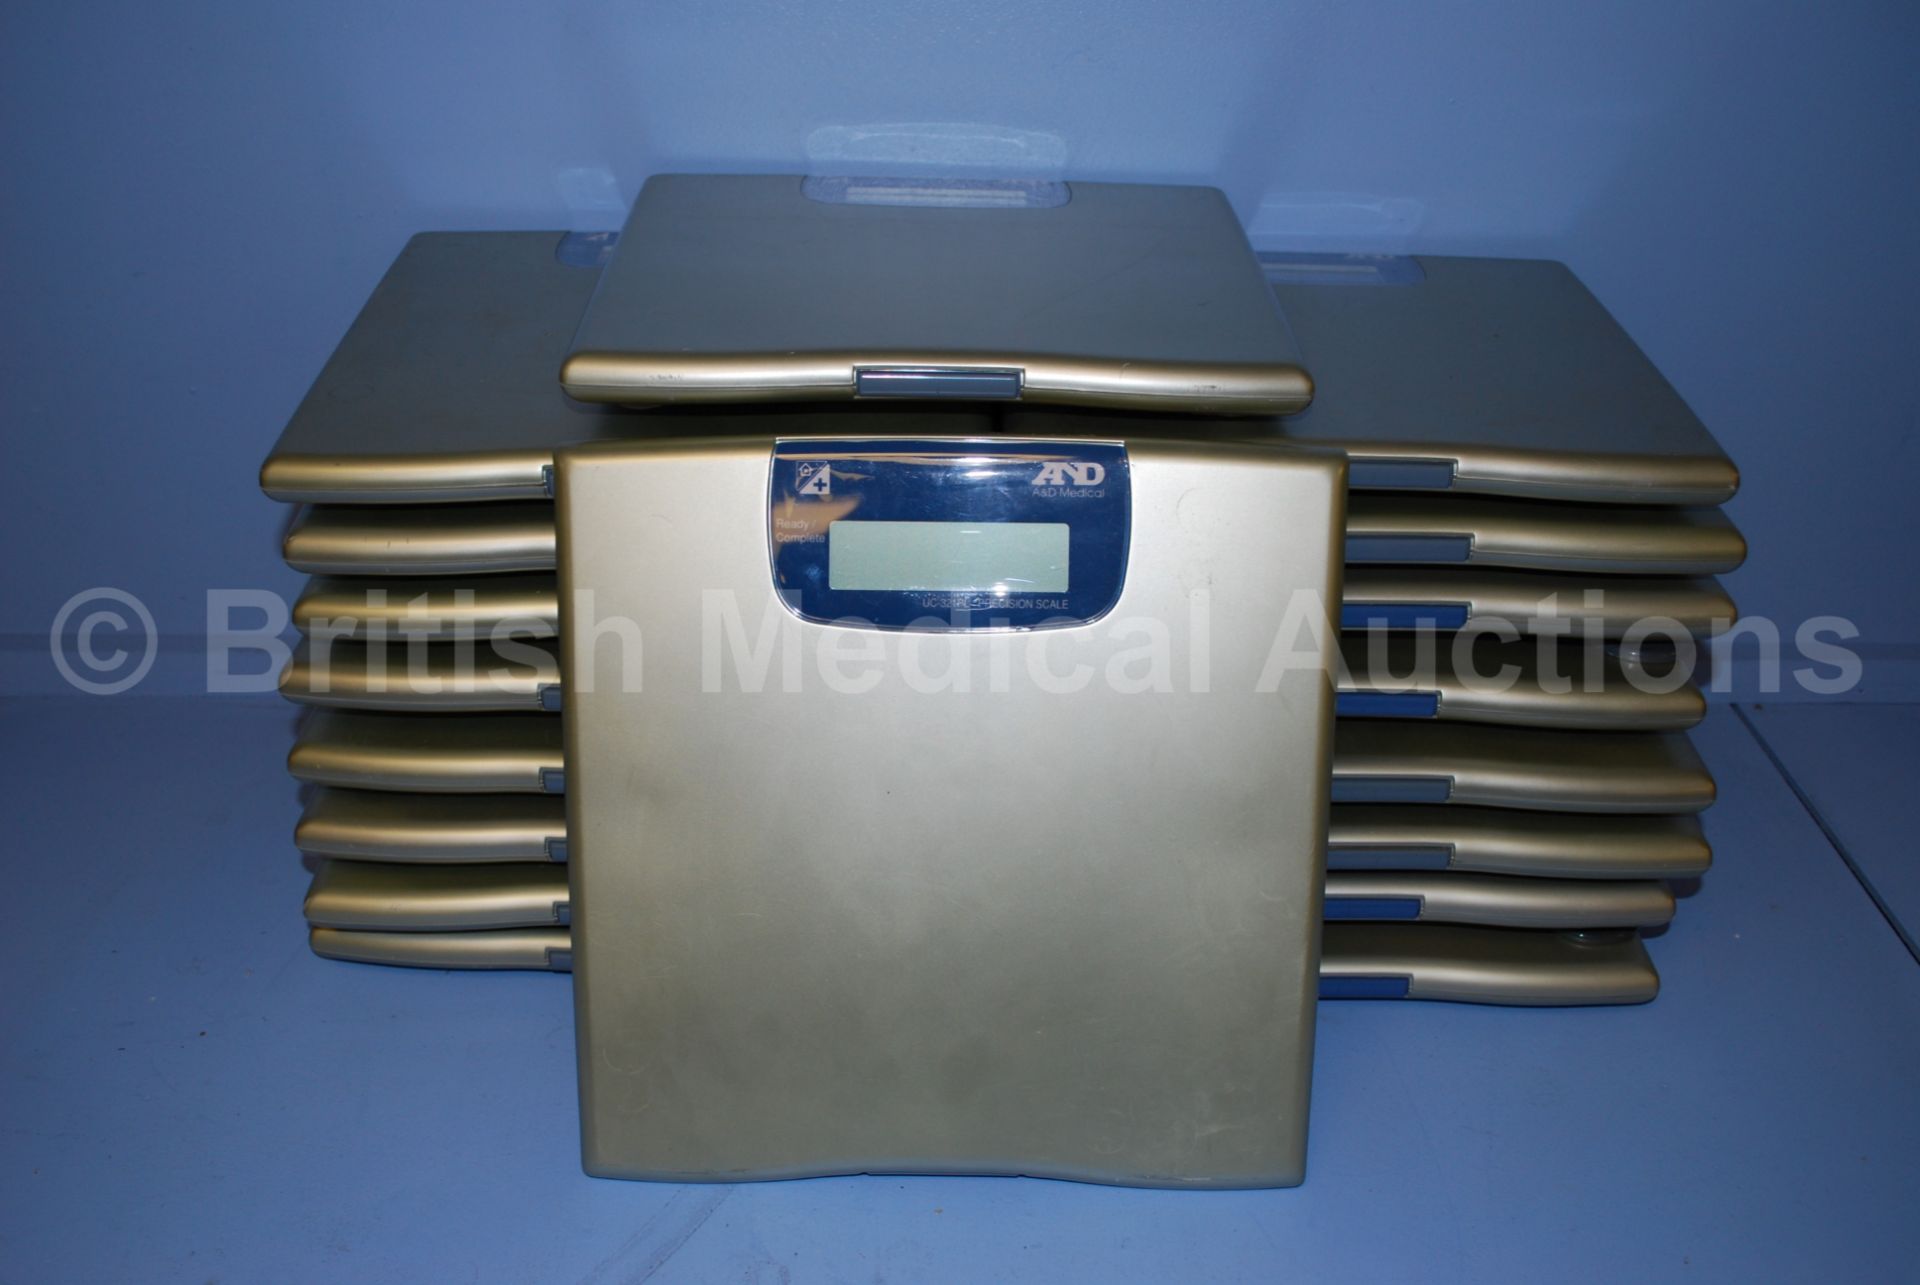 18 x A&D Weighing Scales - Image 2 of 2